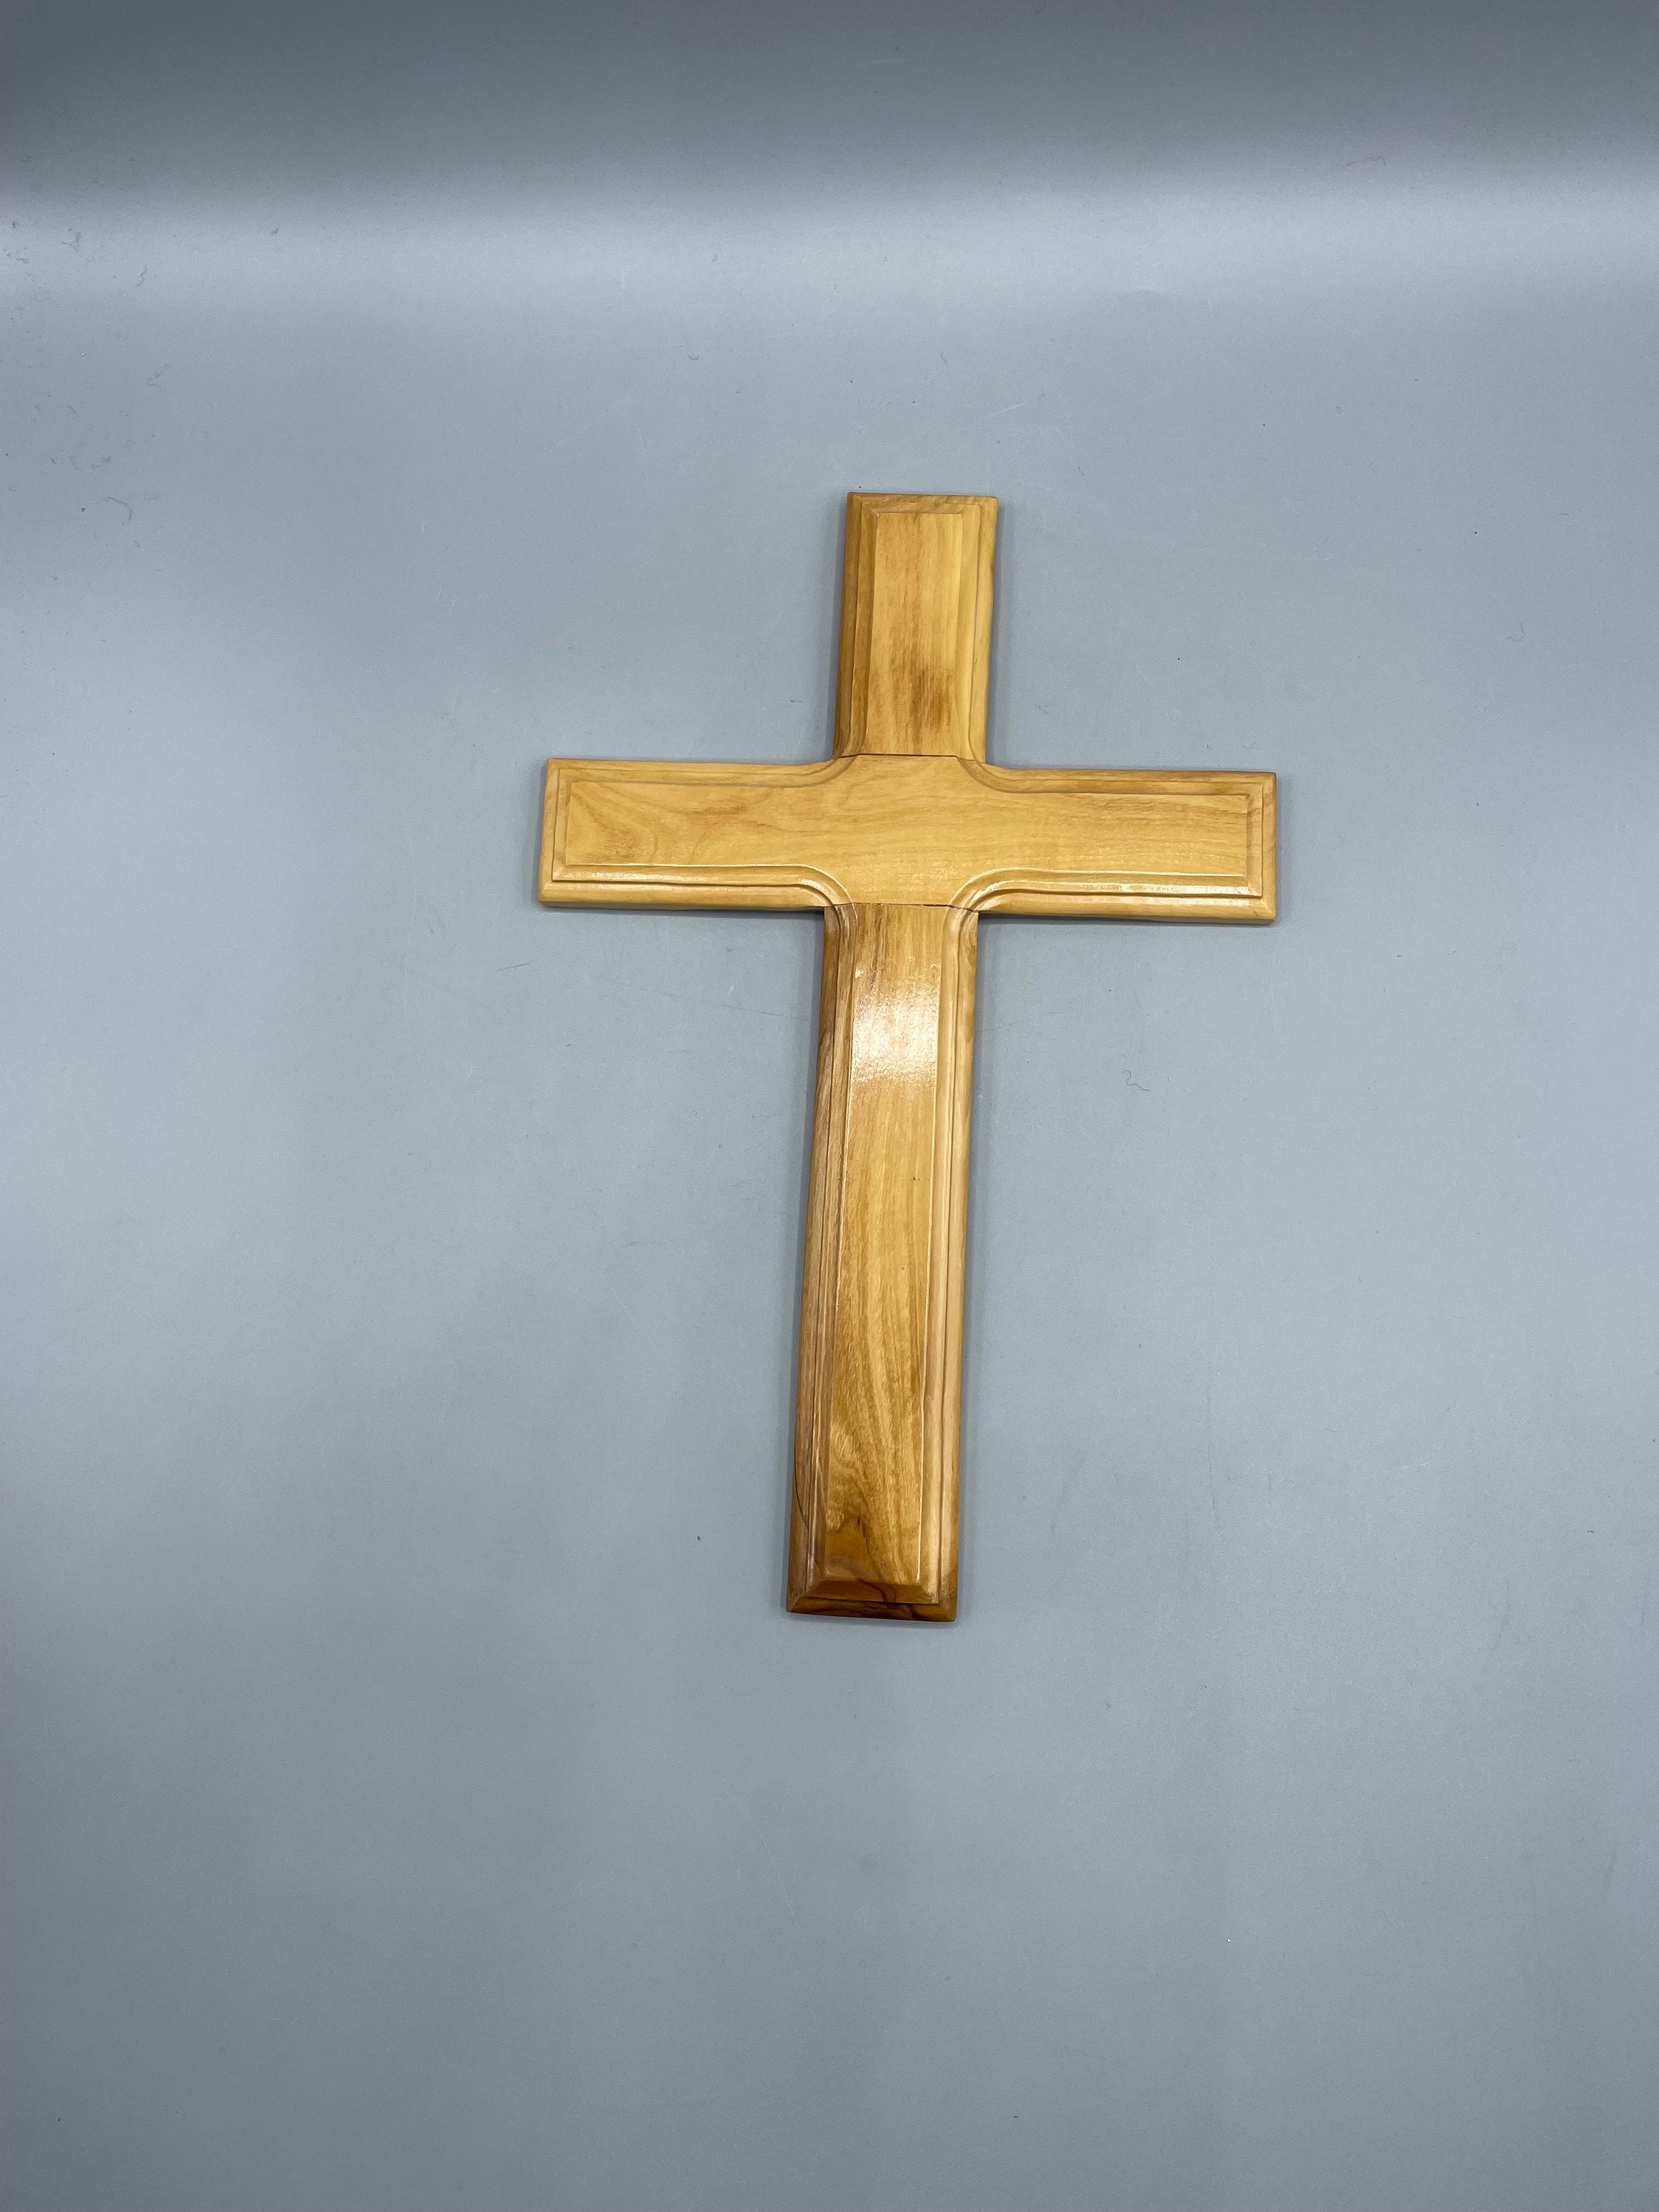 Hand Made Olive Wood Cross (Plain 10 inch) - Wall Hanging Art Décor Straight Simple Wooden Cross, Flat Solid Cross from Jerusalem Where Jesus